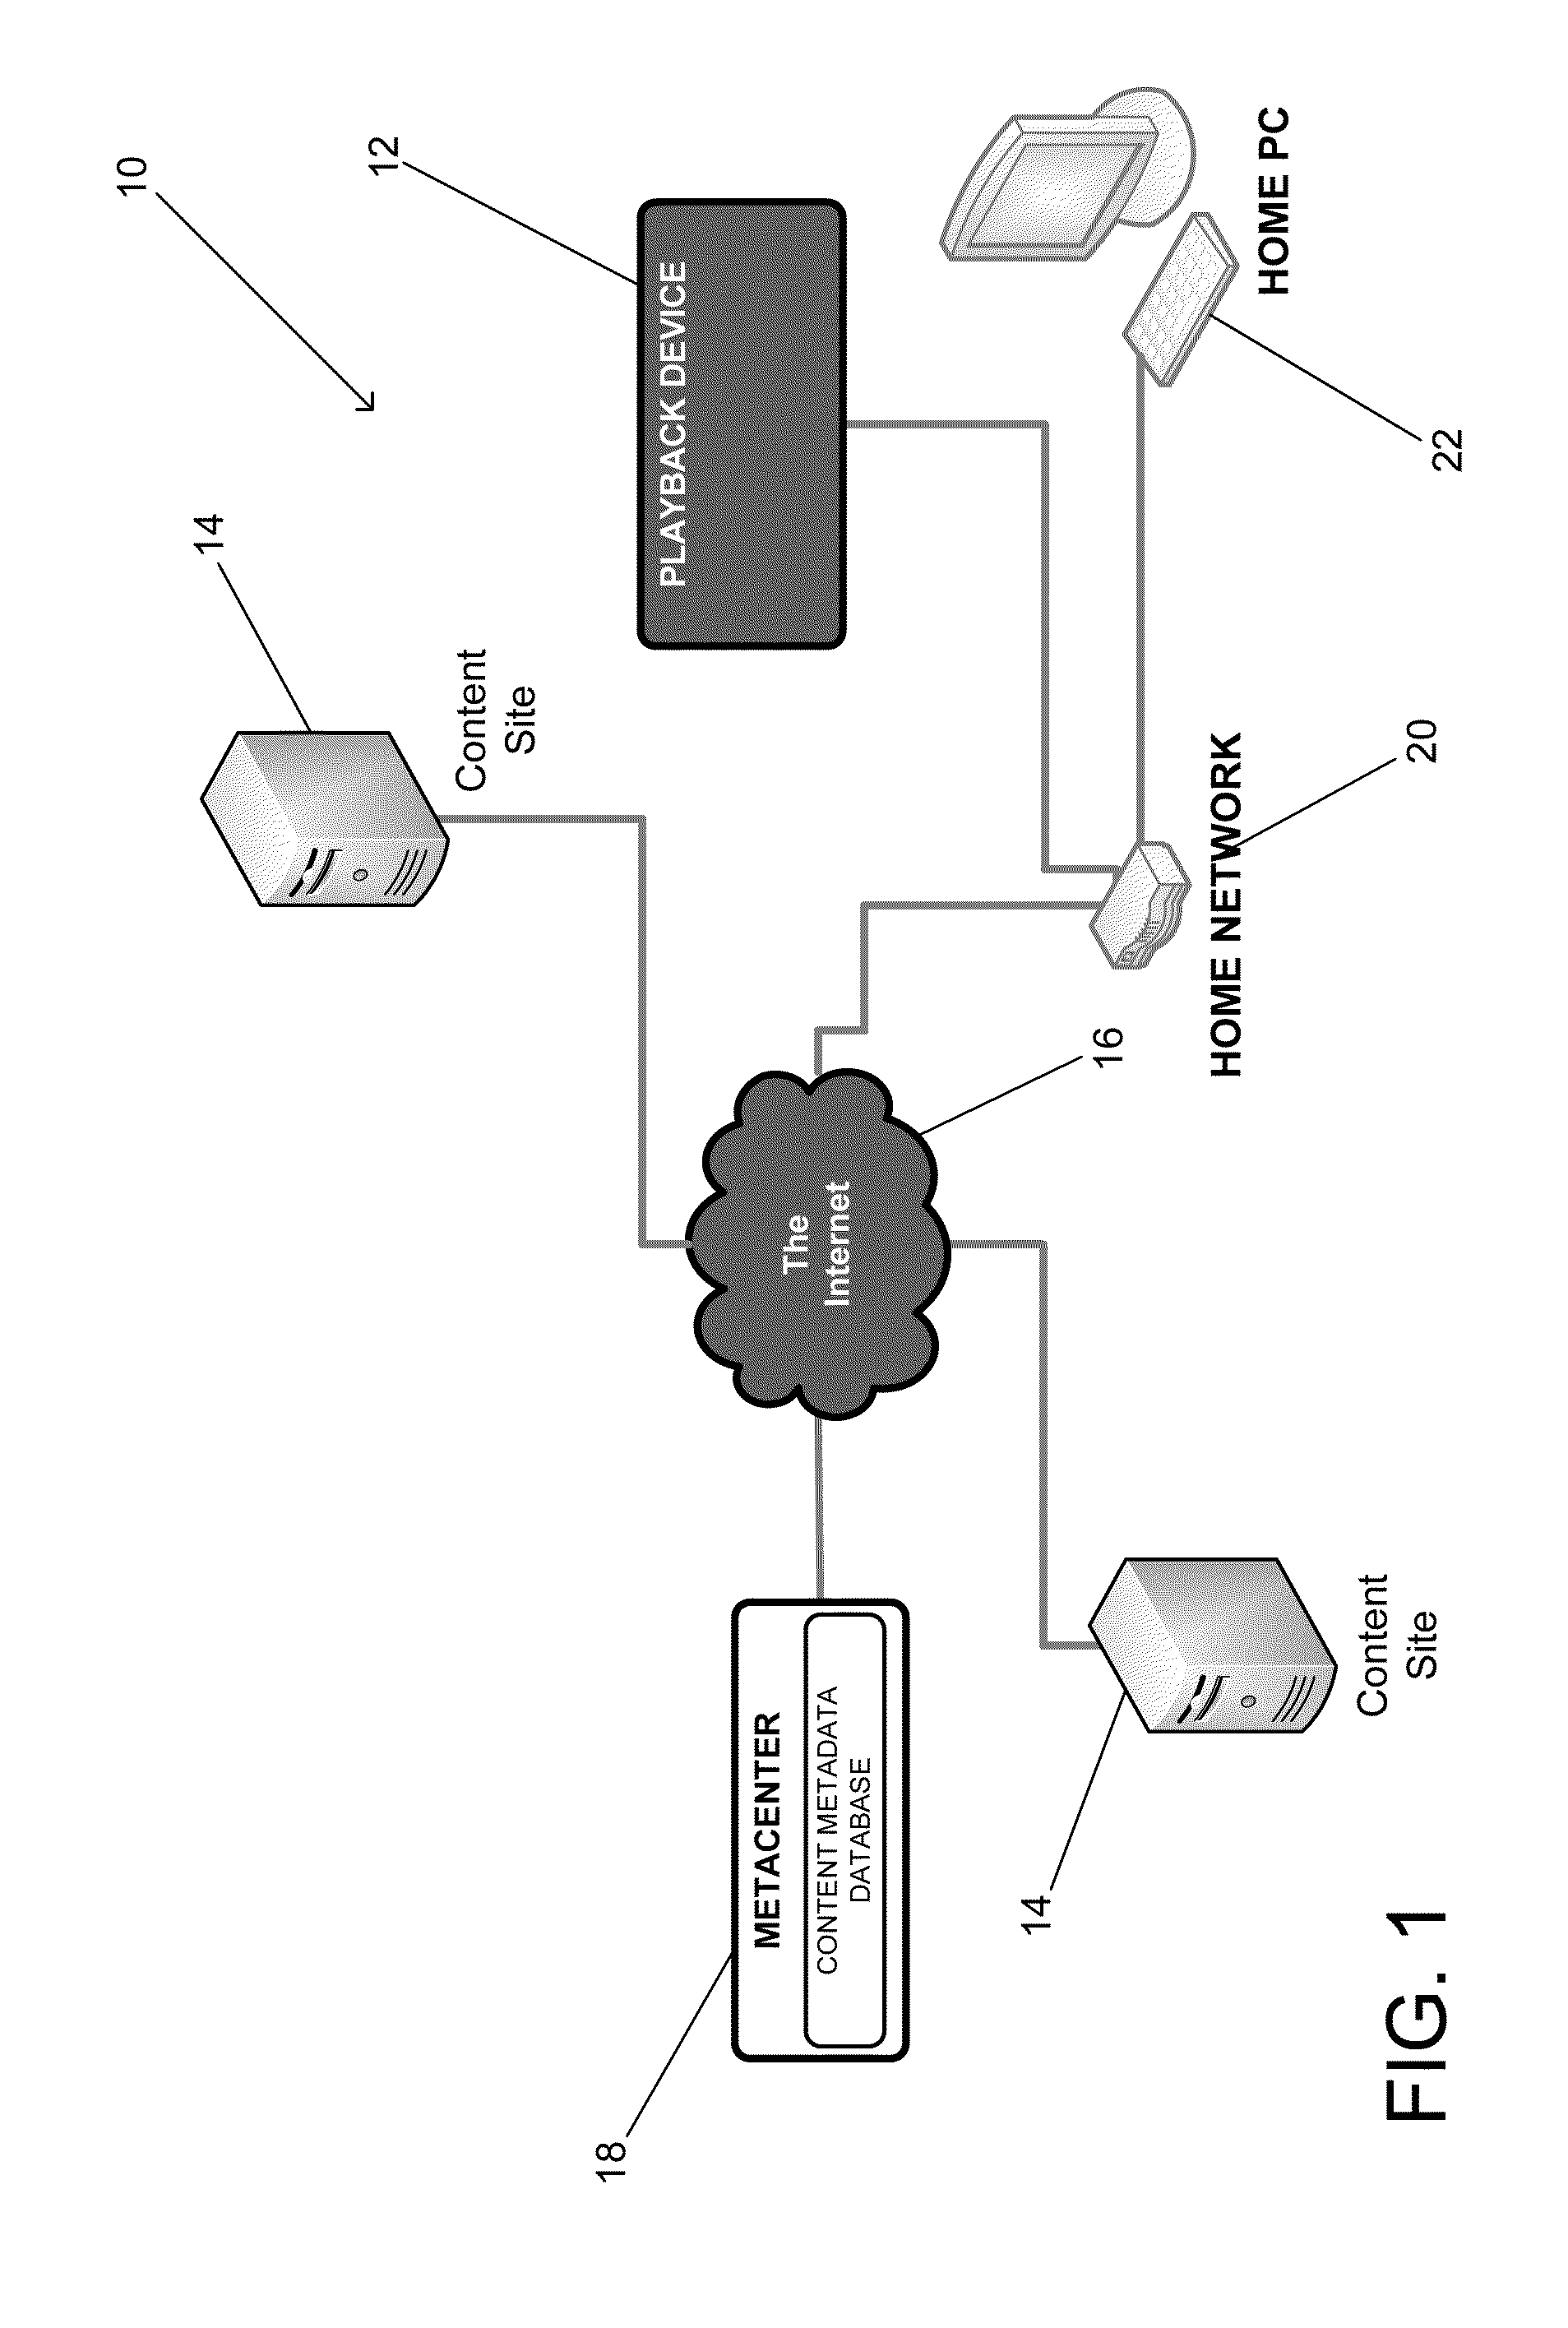 Systems and methods for accessing content using an internet content guide